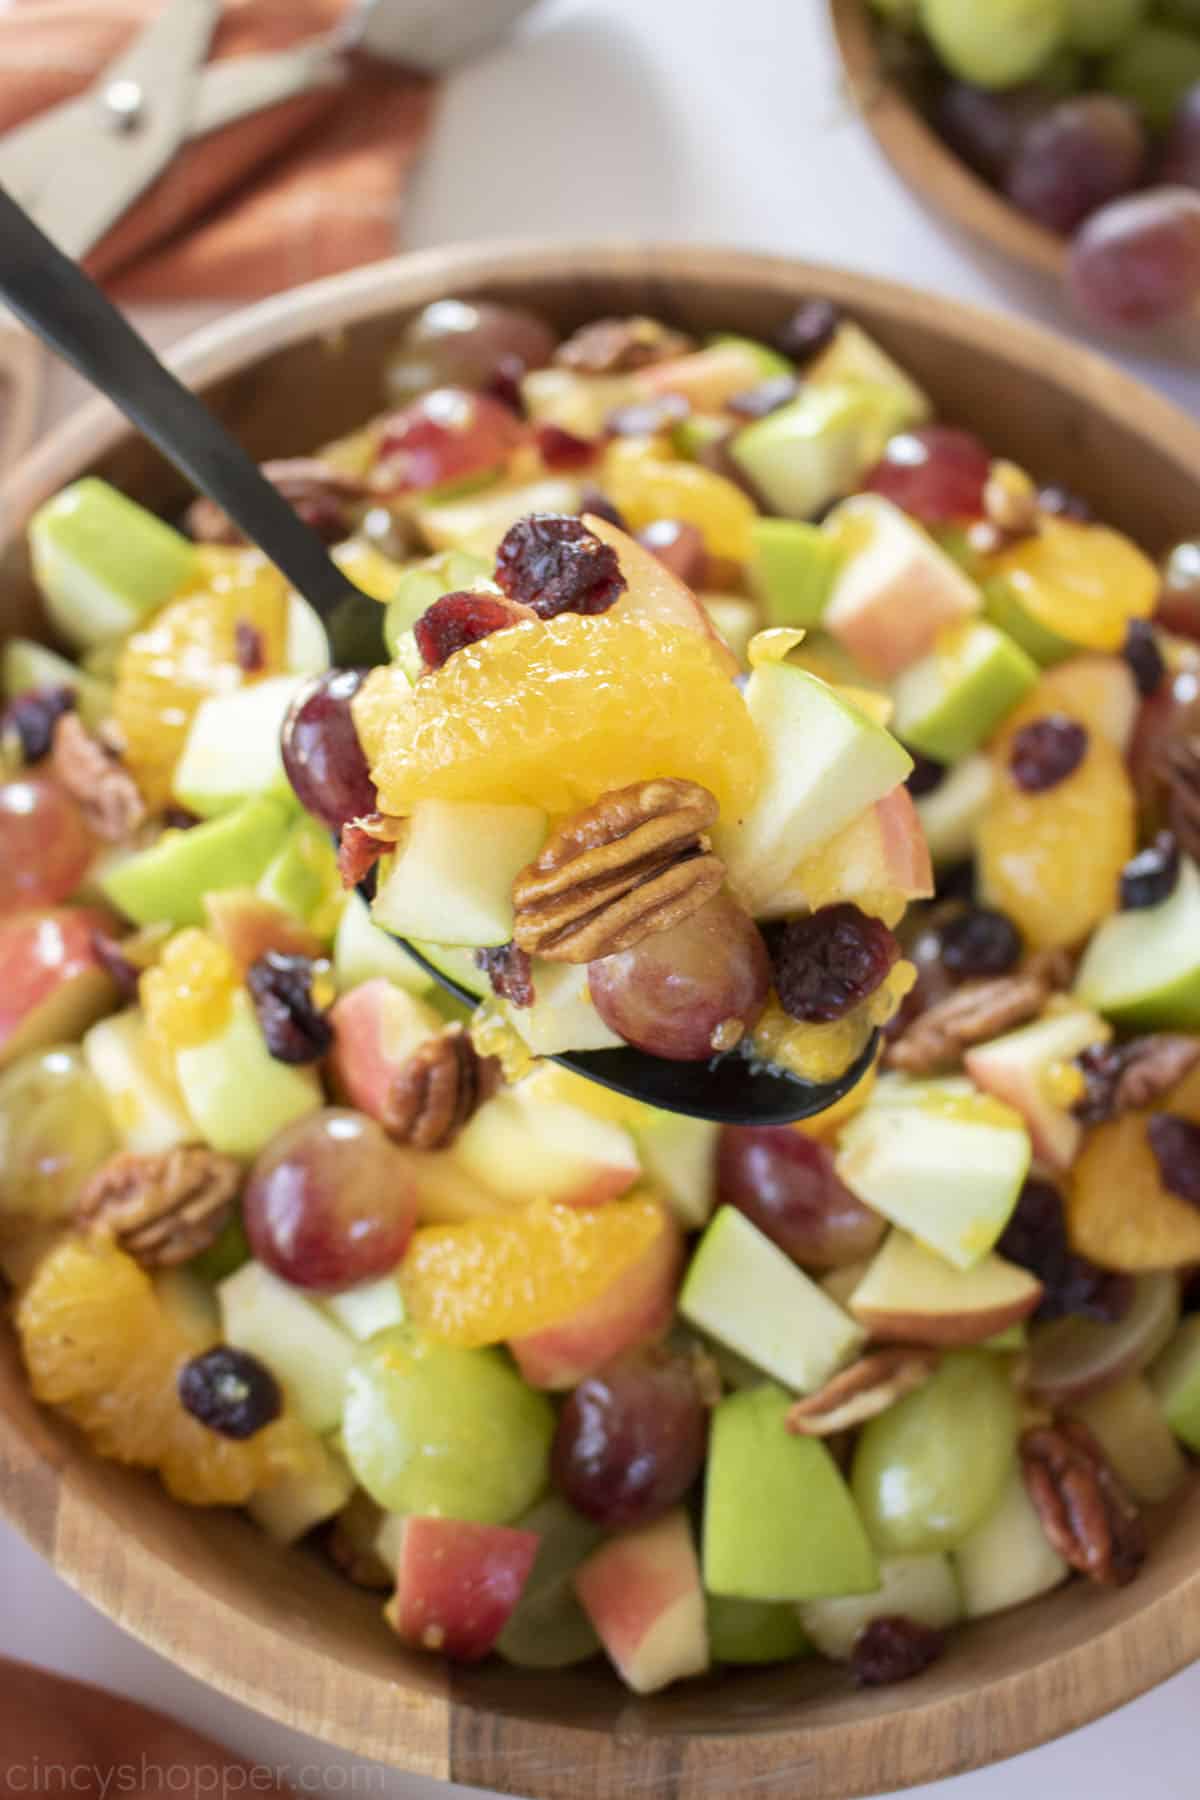 Spoon with Fall Fruit Salad.